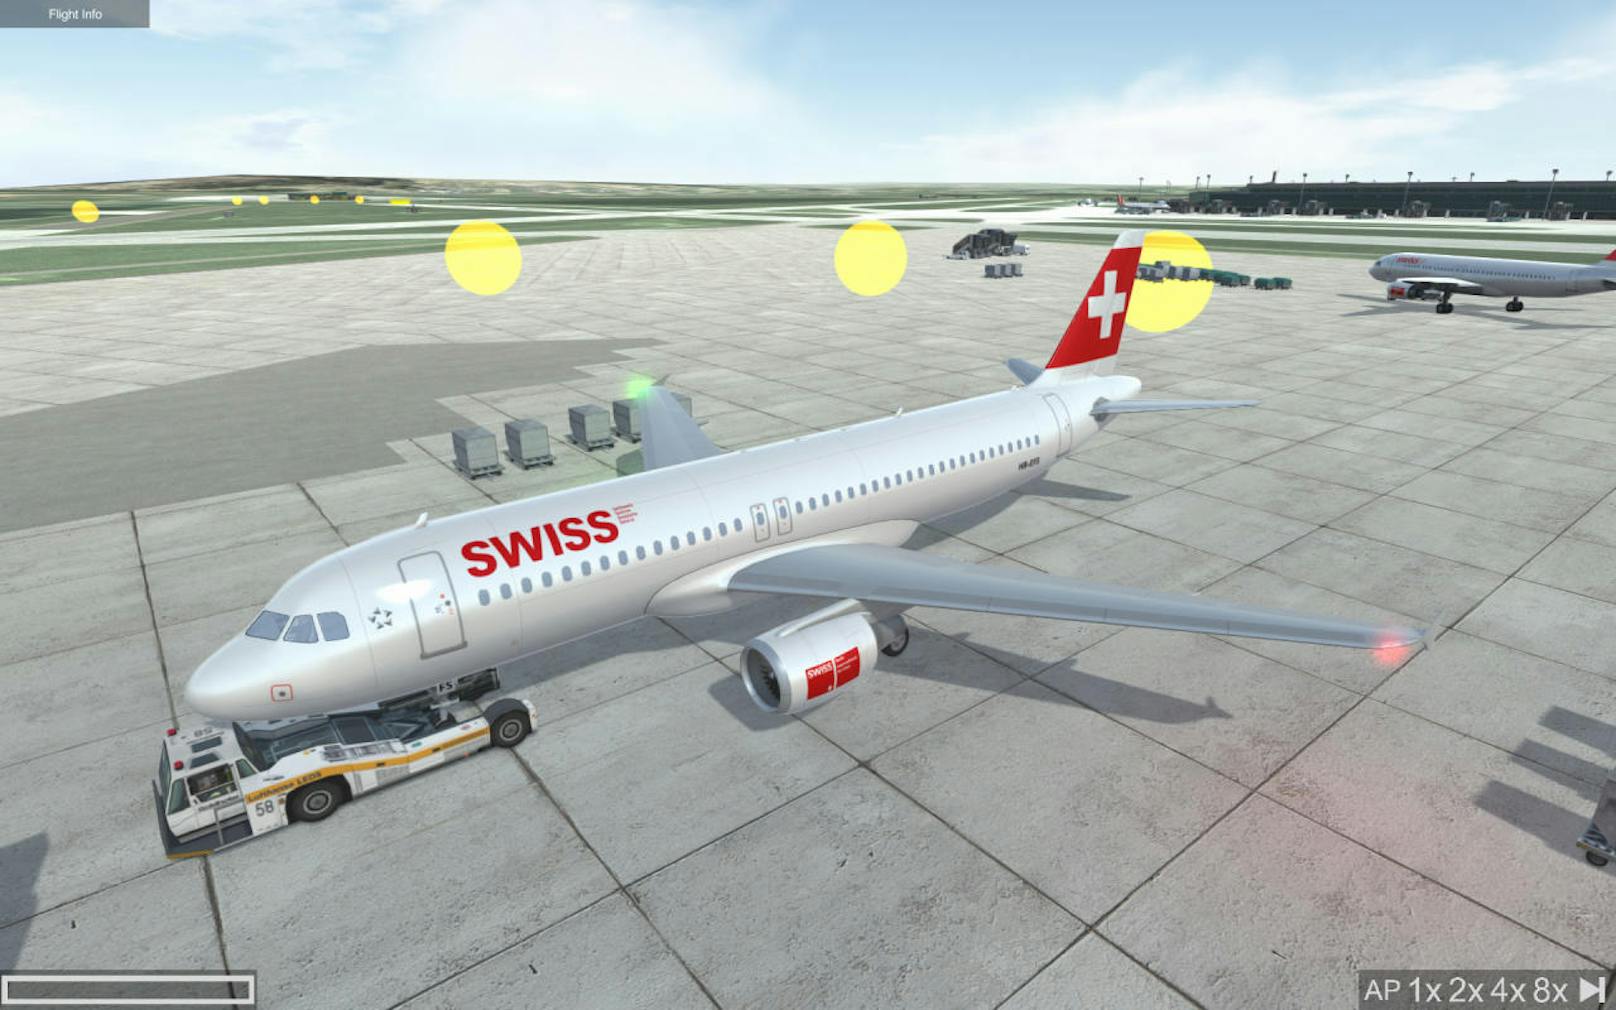  <a href="https://www.heute.at/digital/games/story/Ready-for-Take-off---A320-Simulator-im-Test-47348187" target="_blank">Ready for Take off - A320 Simulator</a>